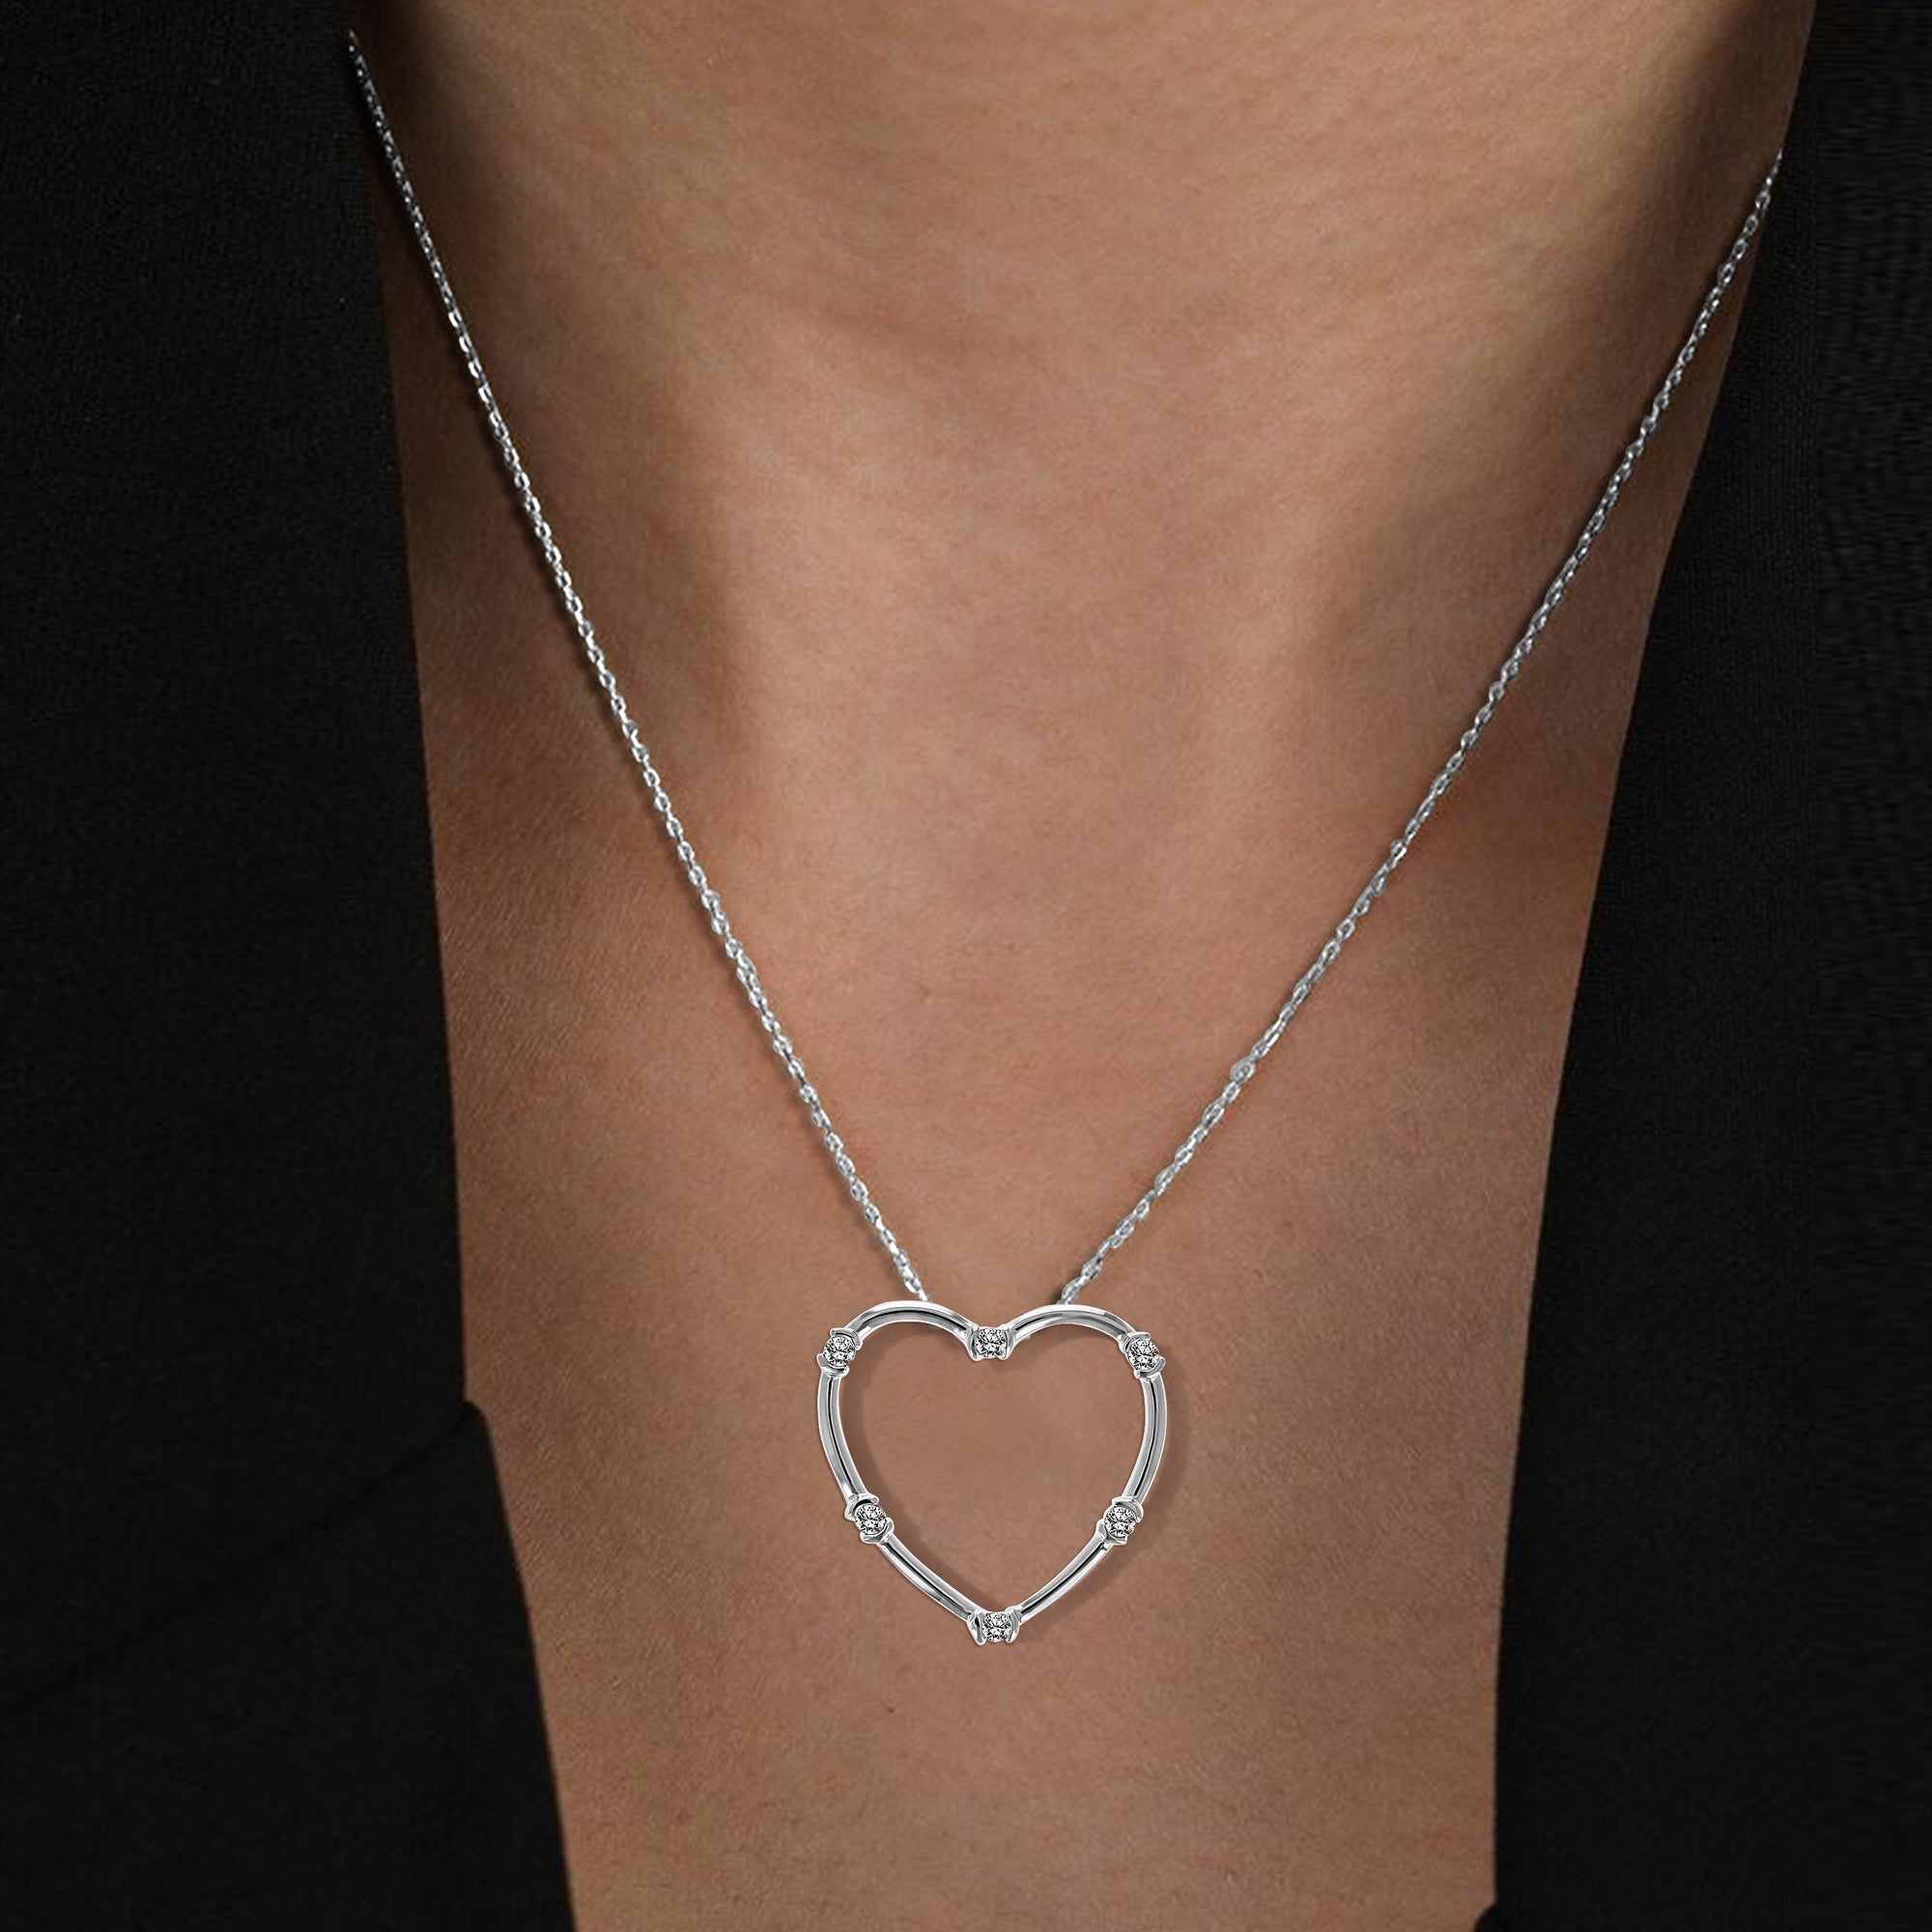 1/5 cttw Diamond Heart Pendant Necklace 10K White Gold with 18 Inch Chain